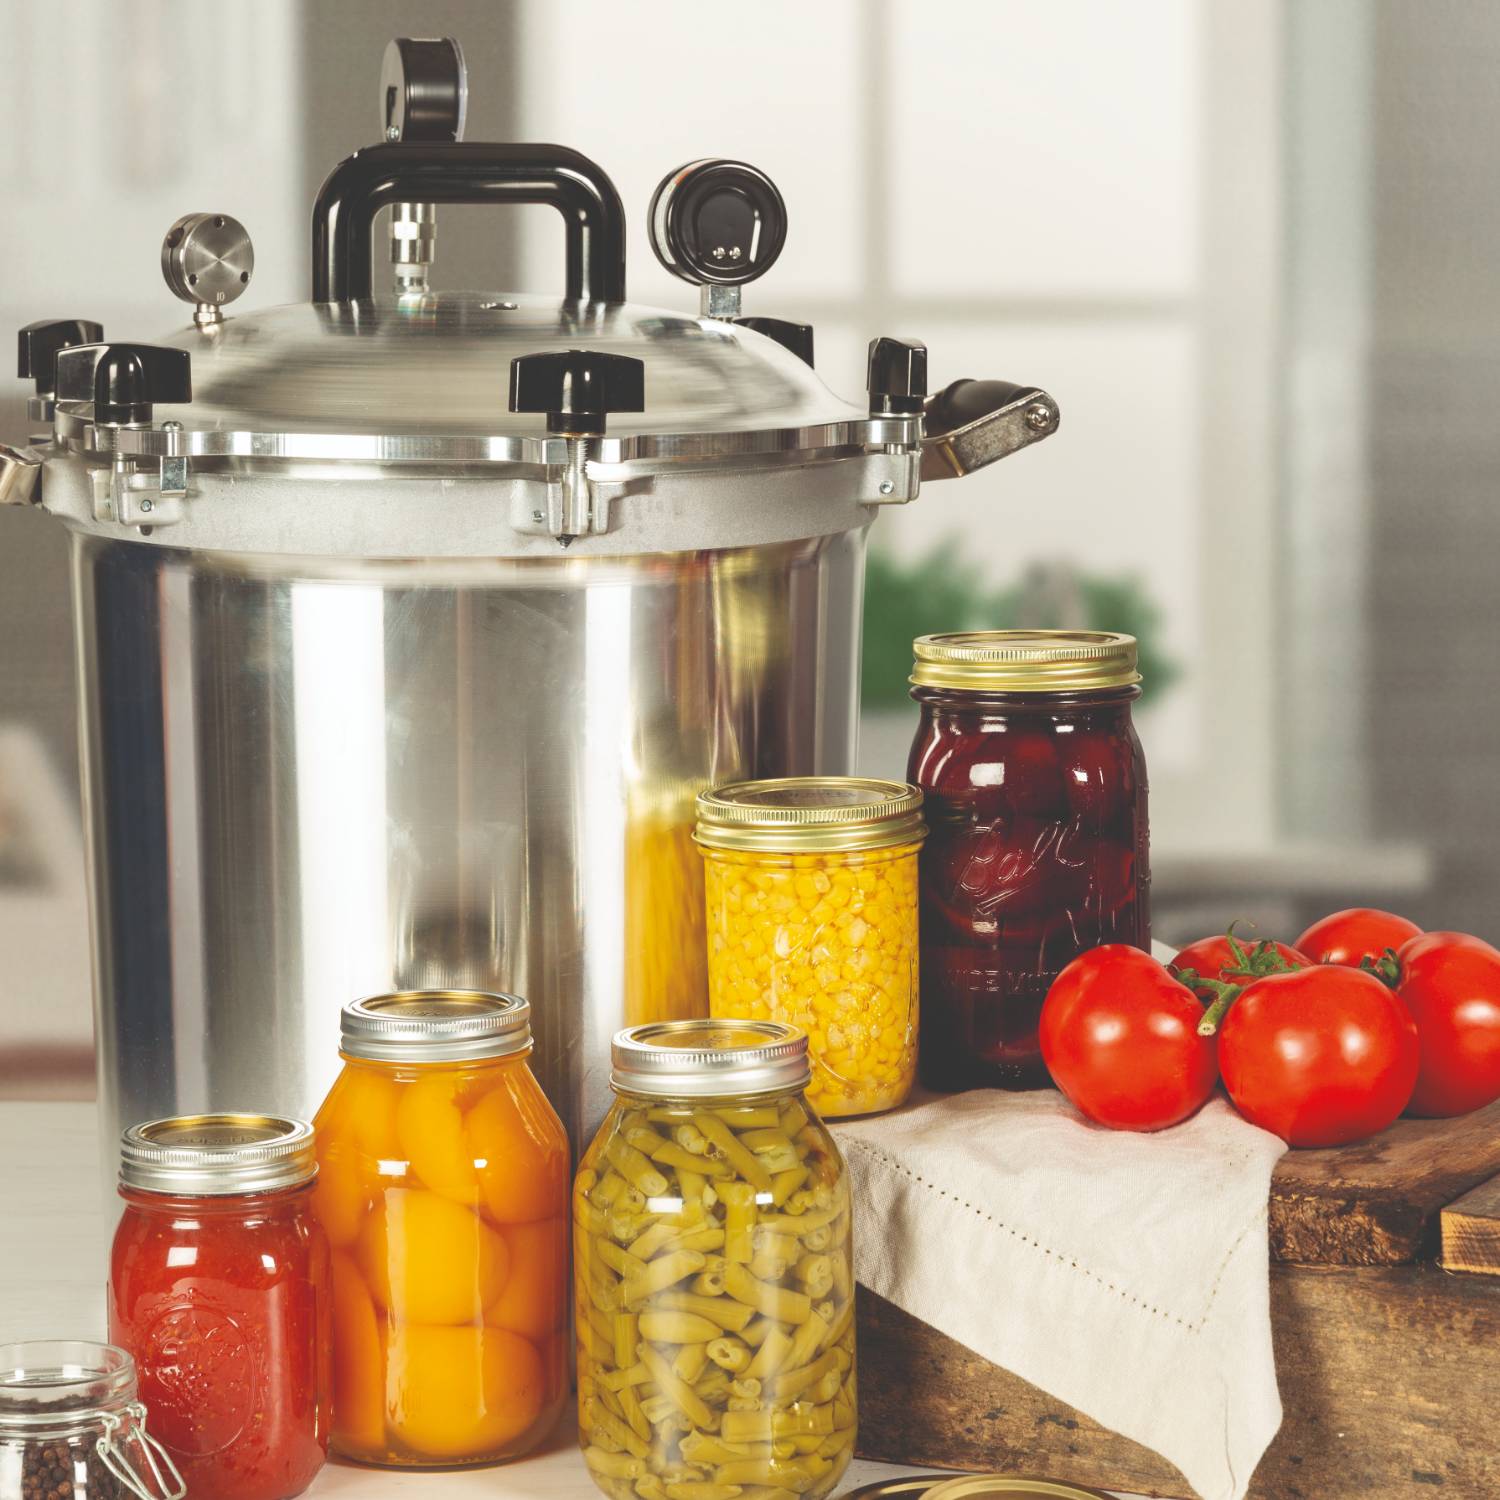 Do You Have To Use Warm Lids When Home Canning?